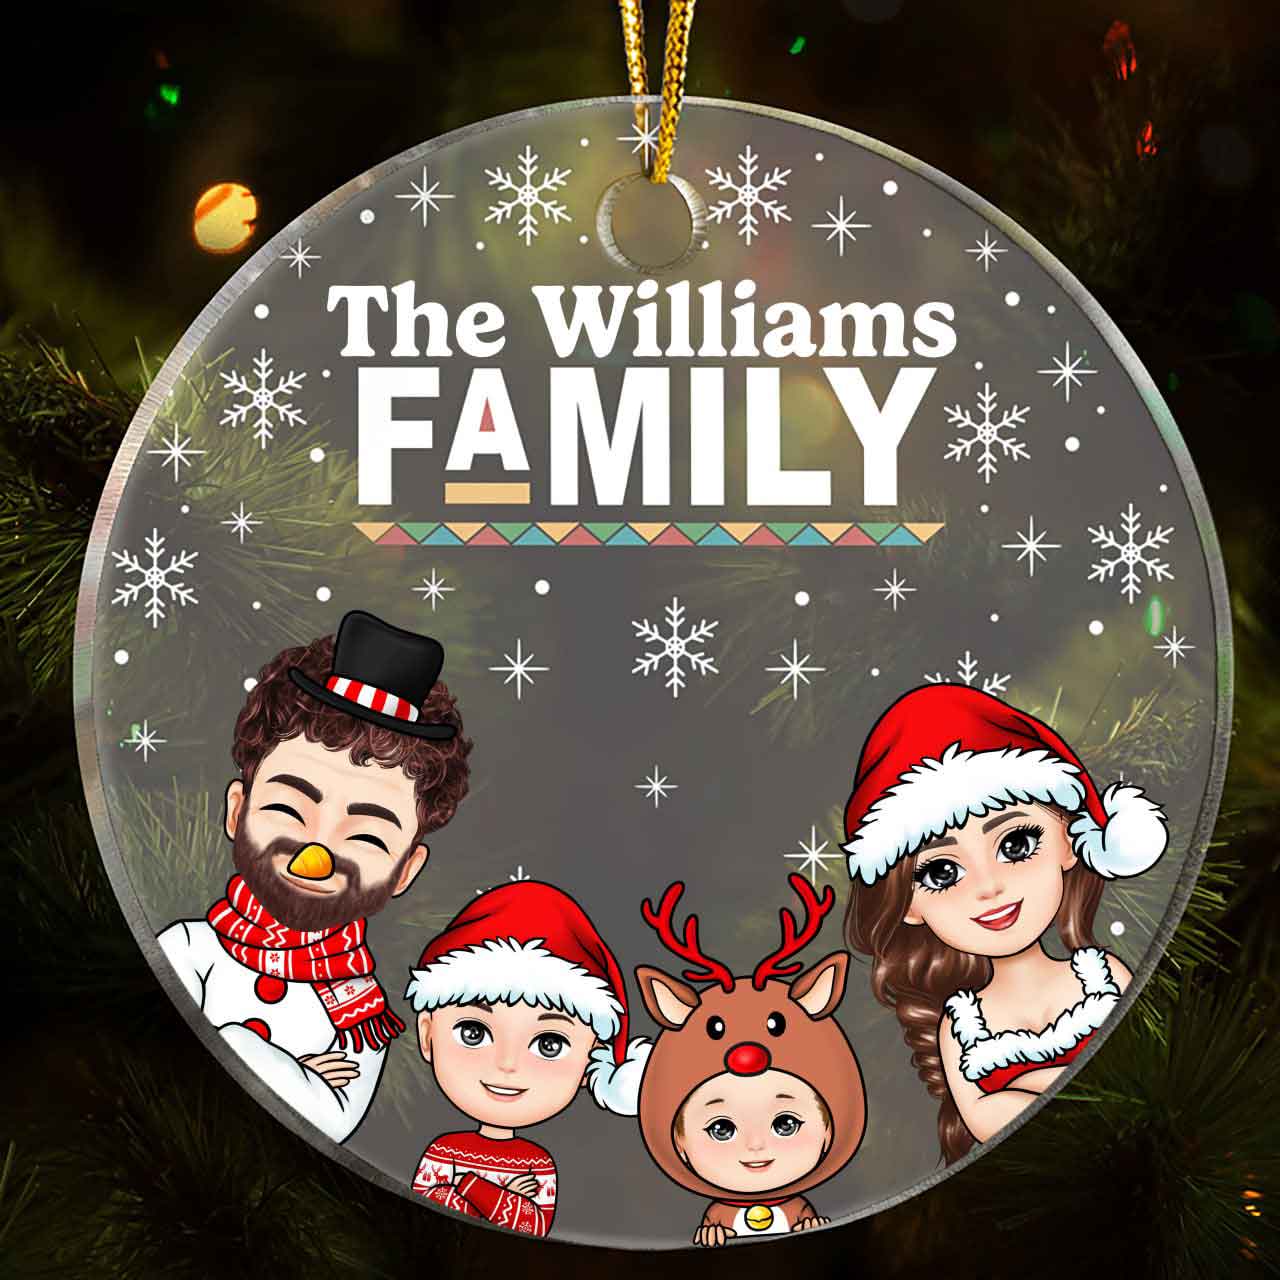 Merry Christmas Family - Personalized Ornament - Christmas Gift For Family